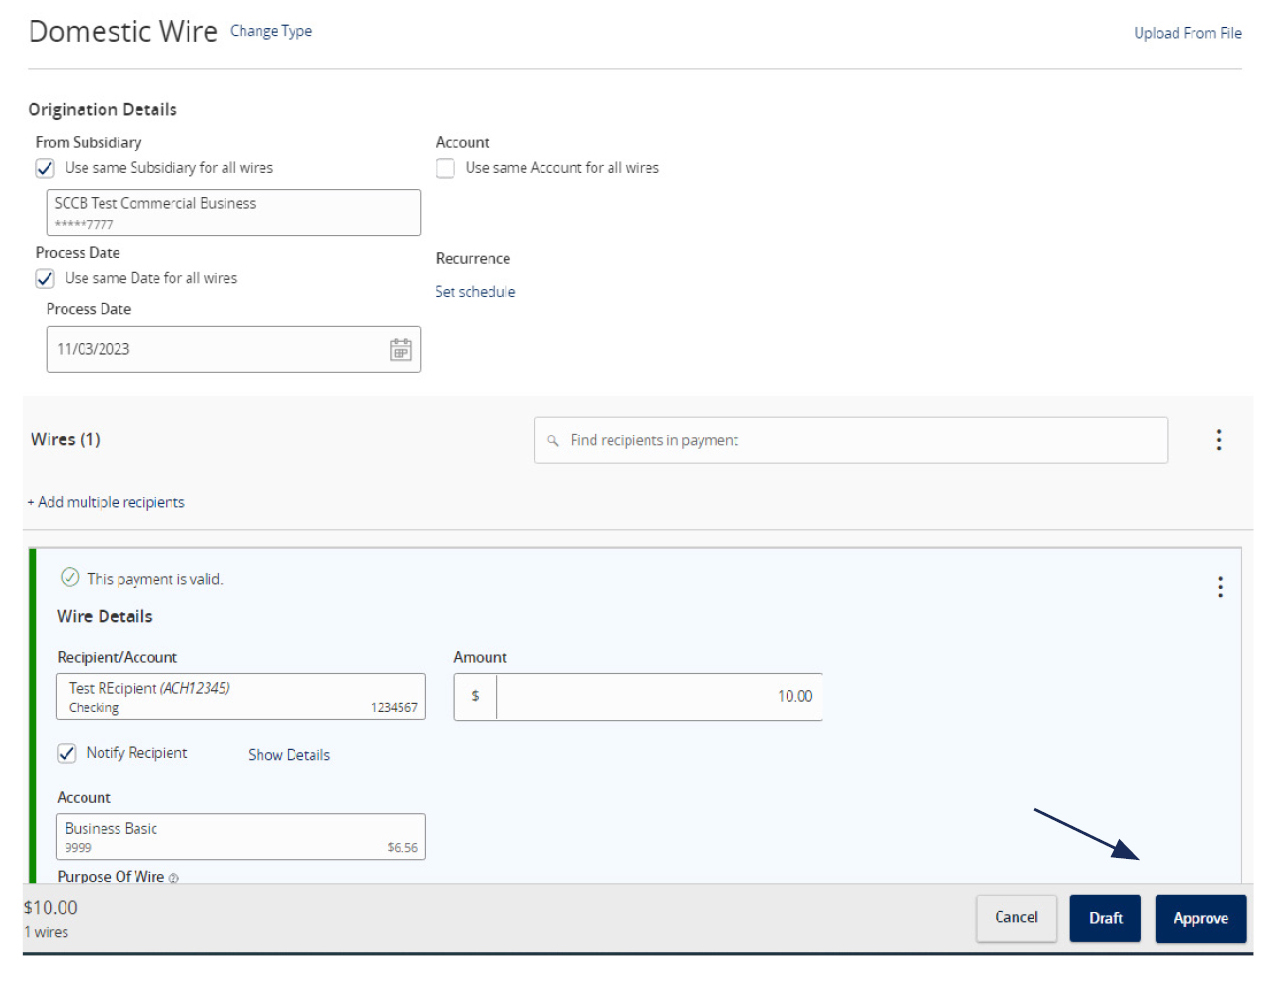 Image of the Domestic Wire form and how it allows you to review your selections, with options to Cancel, Draft or Approve.